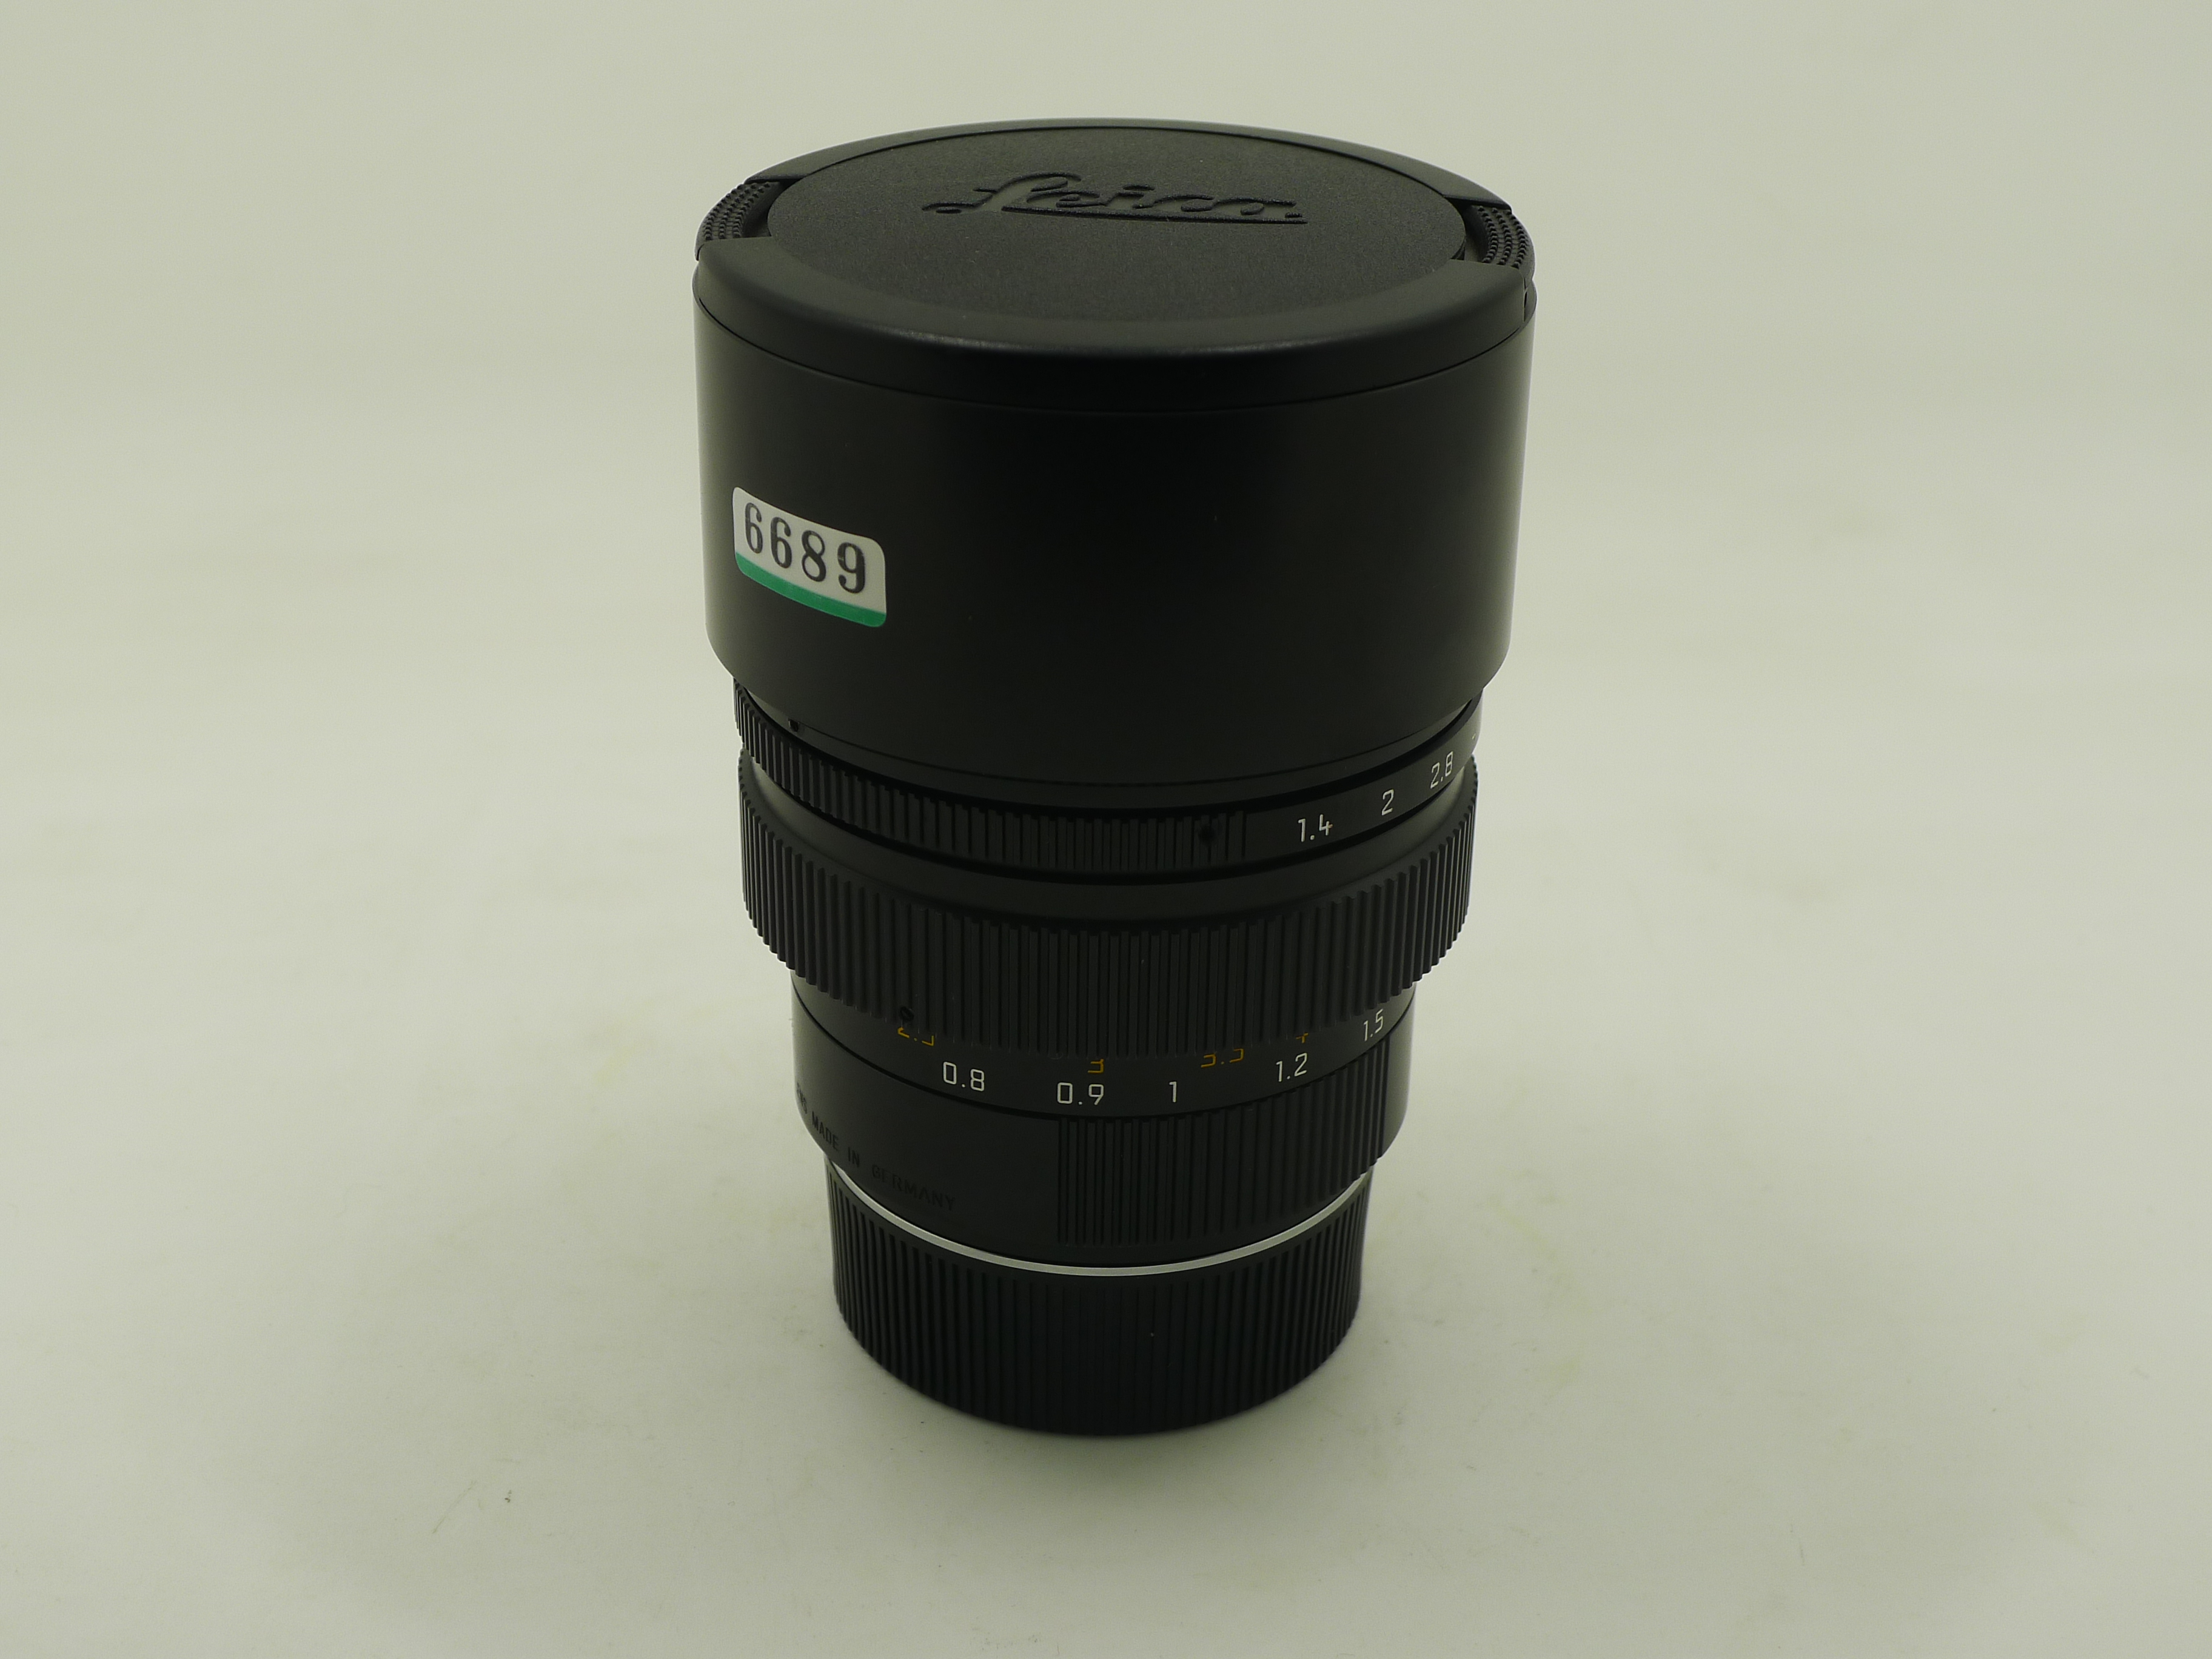  Leica Summilux-M 75 mm f/ 1.4     Perfect quality of German products in the later stage - 6689